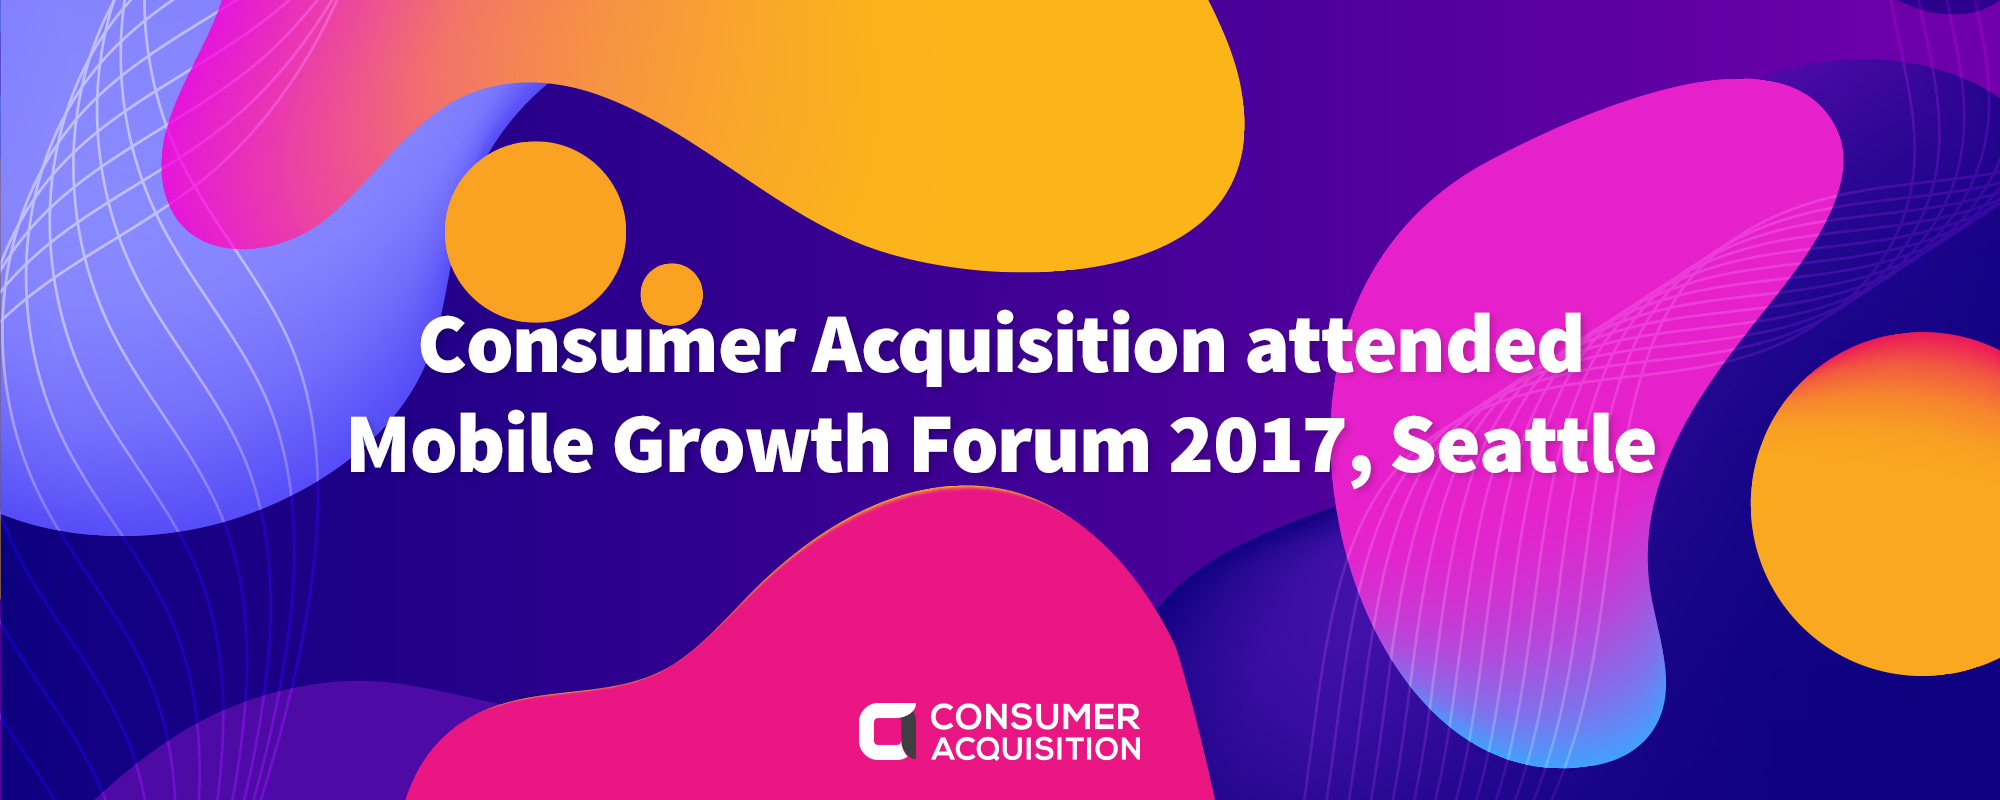 Consumer Acquisition attended Mobile Growth Forum 2017, Seattle